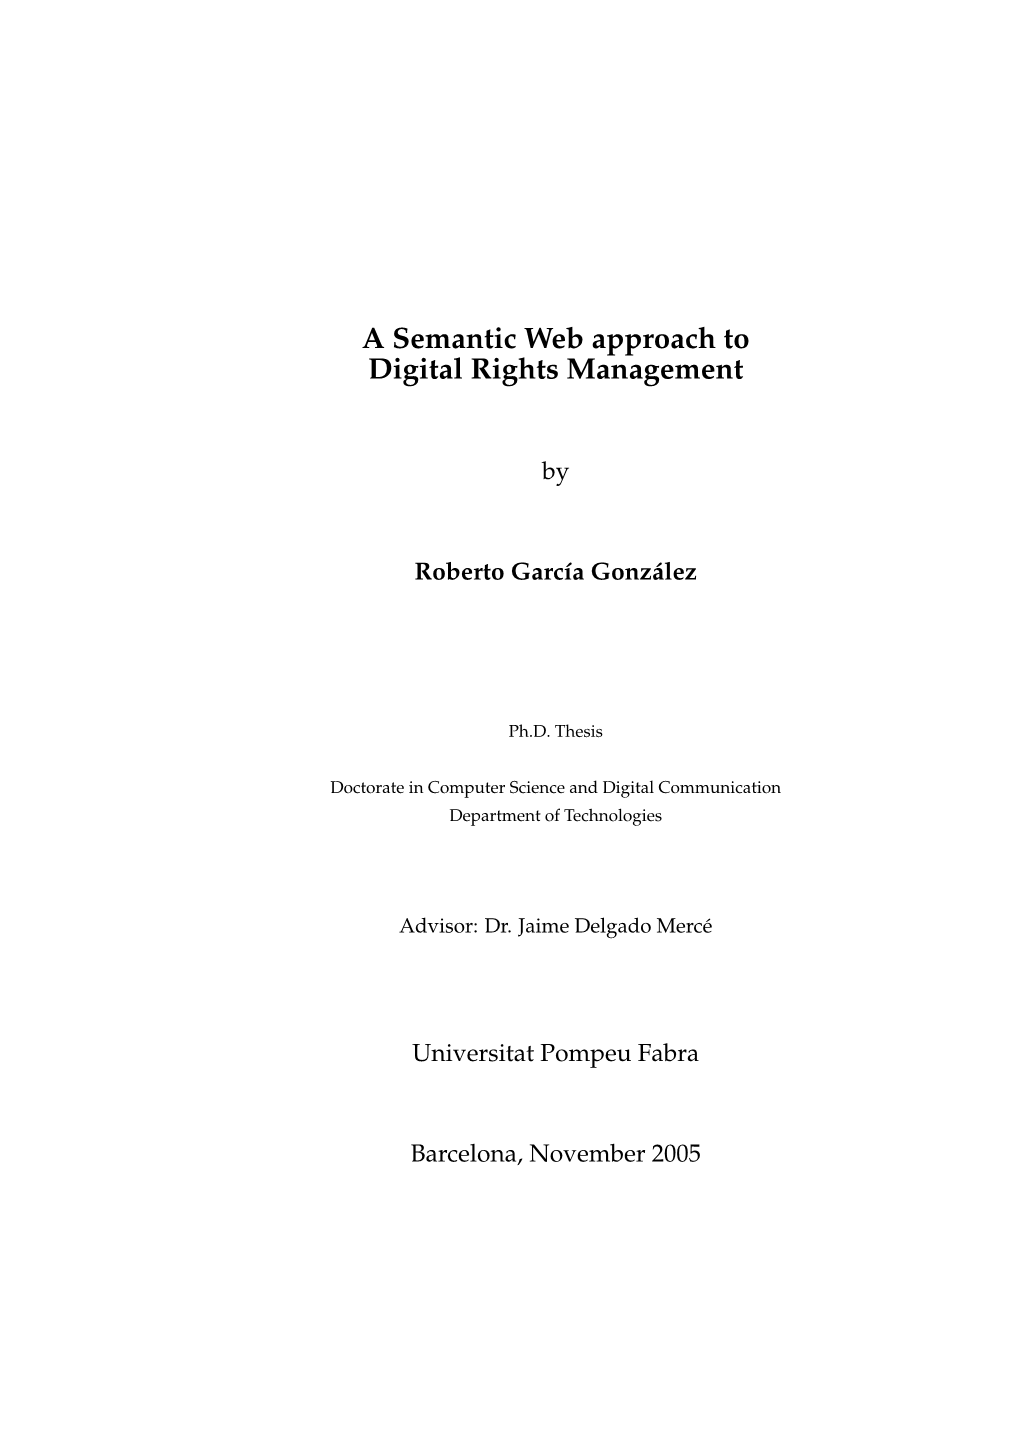 A Semantic Web Approach to Digital Rights Management